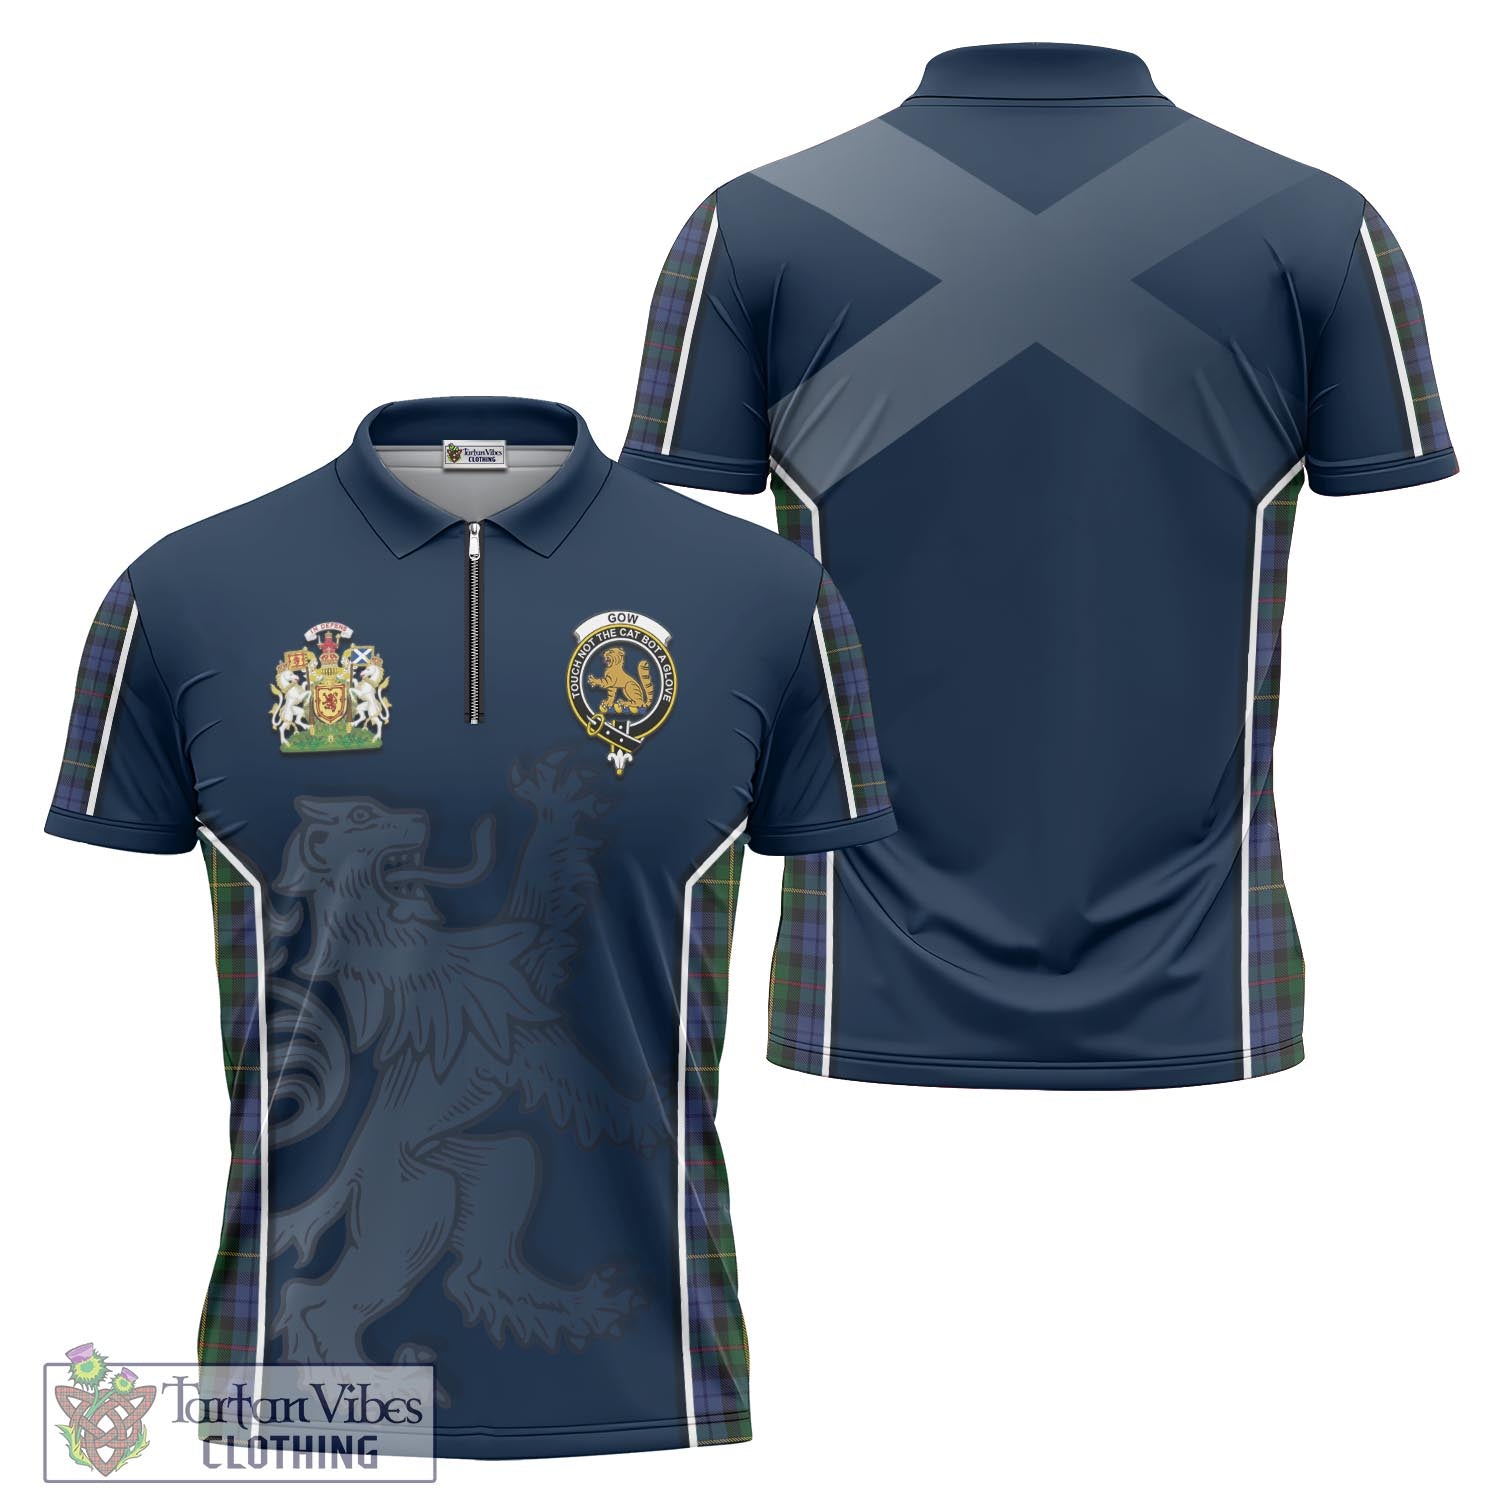 Tartan Vibes Clothing Gow Hunting Tartan Zipper Polo Shirt with Family Crest and Lion Rampant Vibes Sport Style